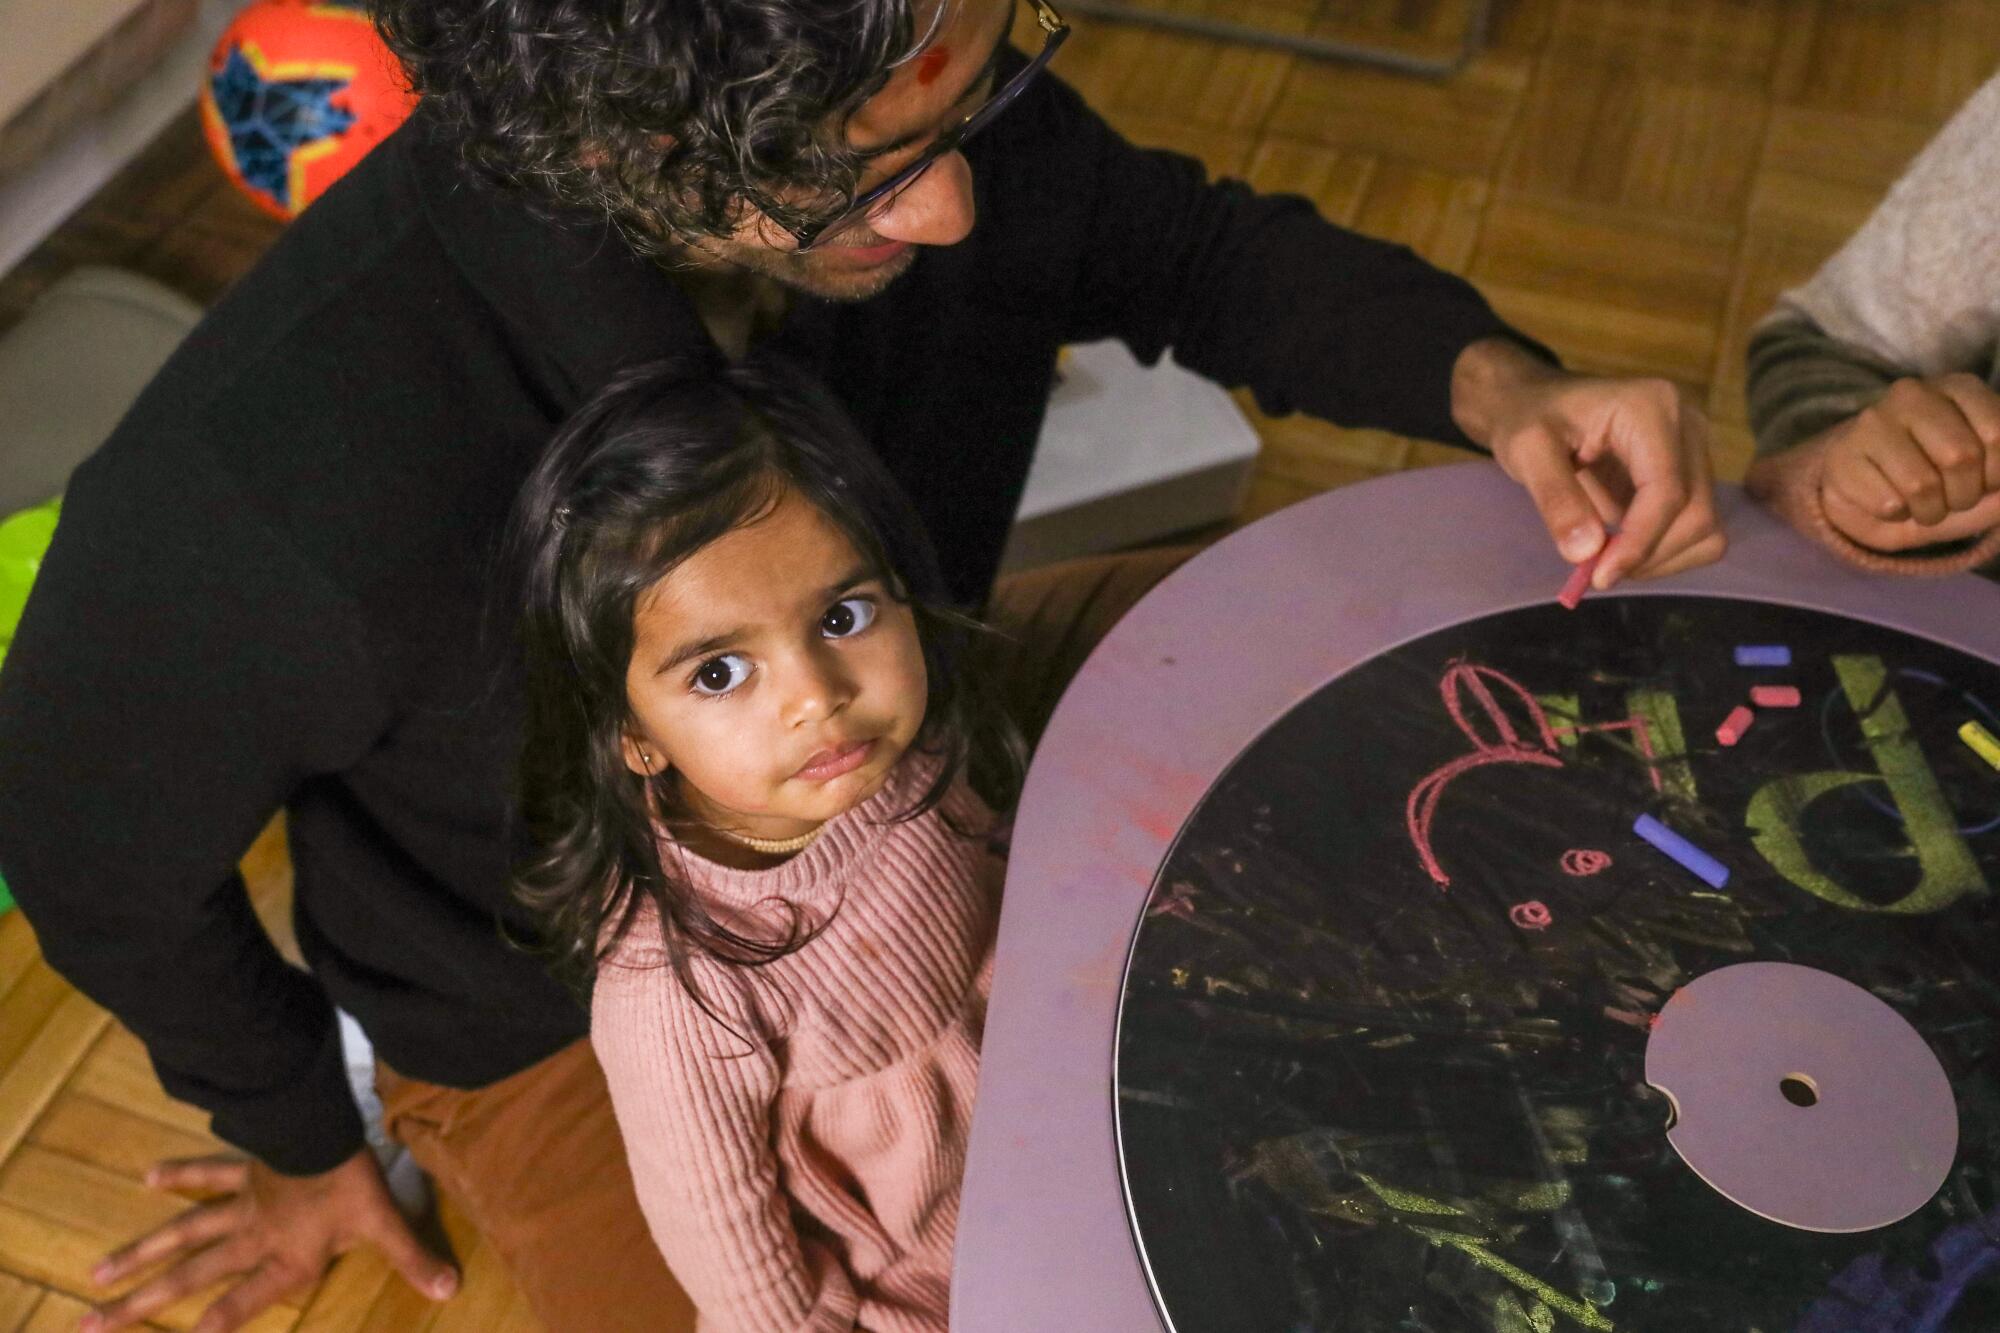 A child looks up as her father points to an arts project on a table. 